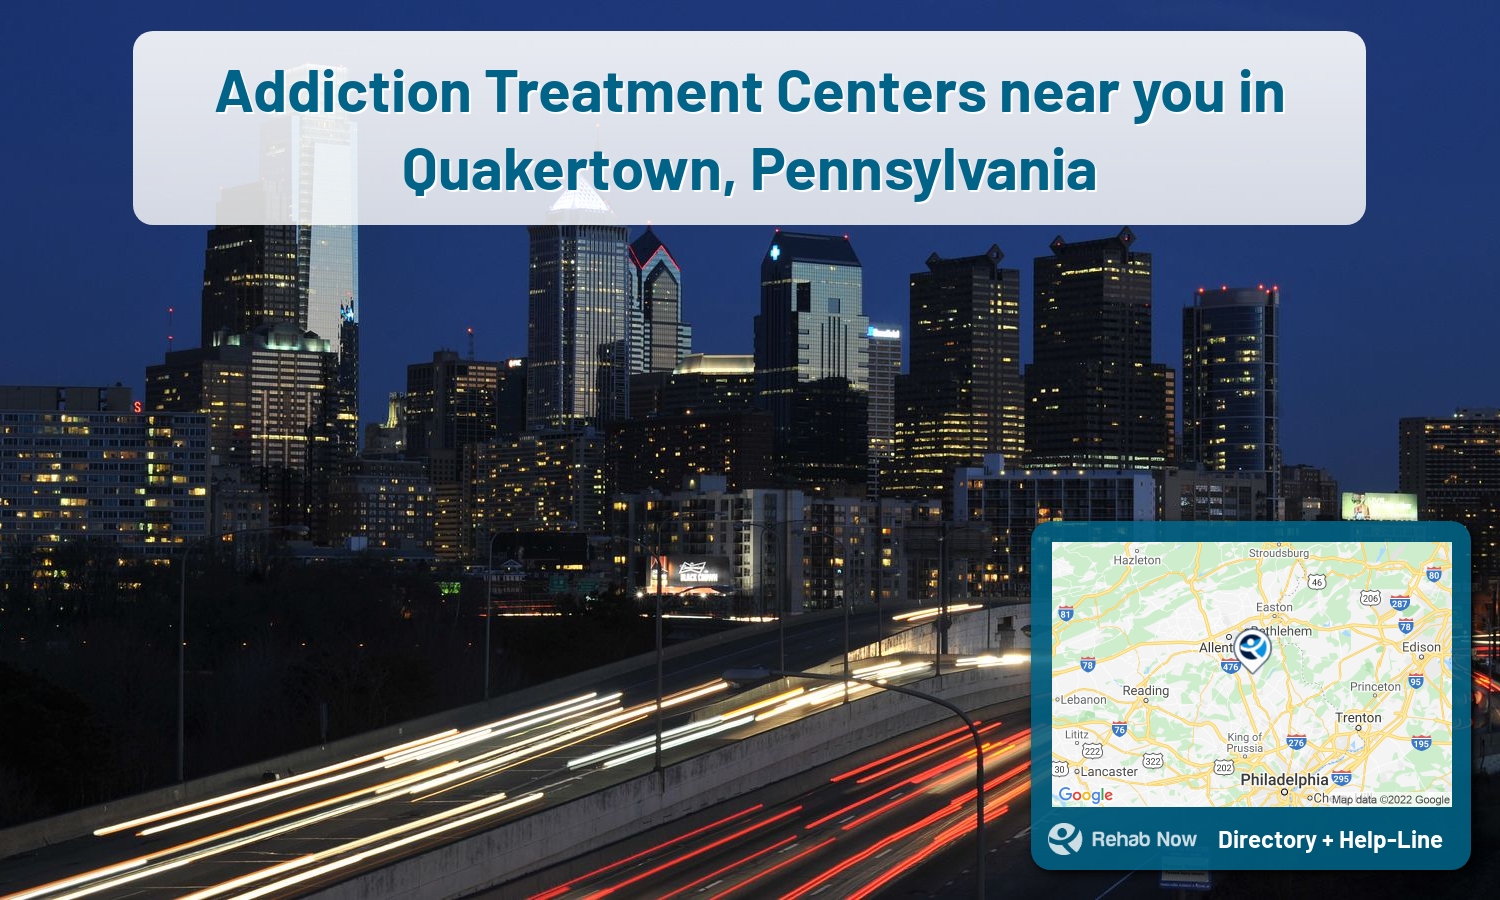 View options, availability, treatment methods, and more, for drug rehab and alcohol treatment in Quakertown, Pennsylvania